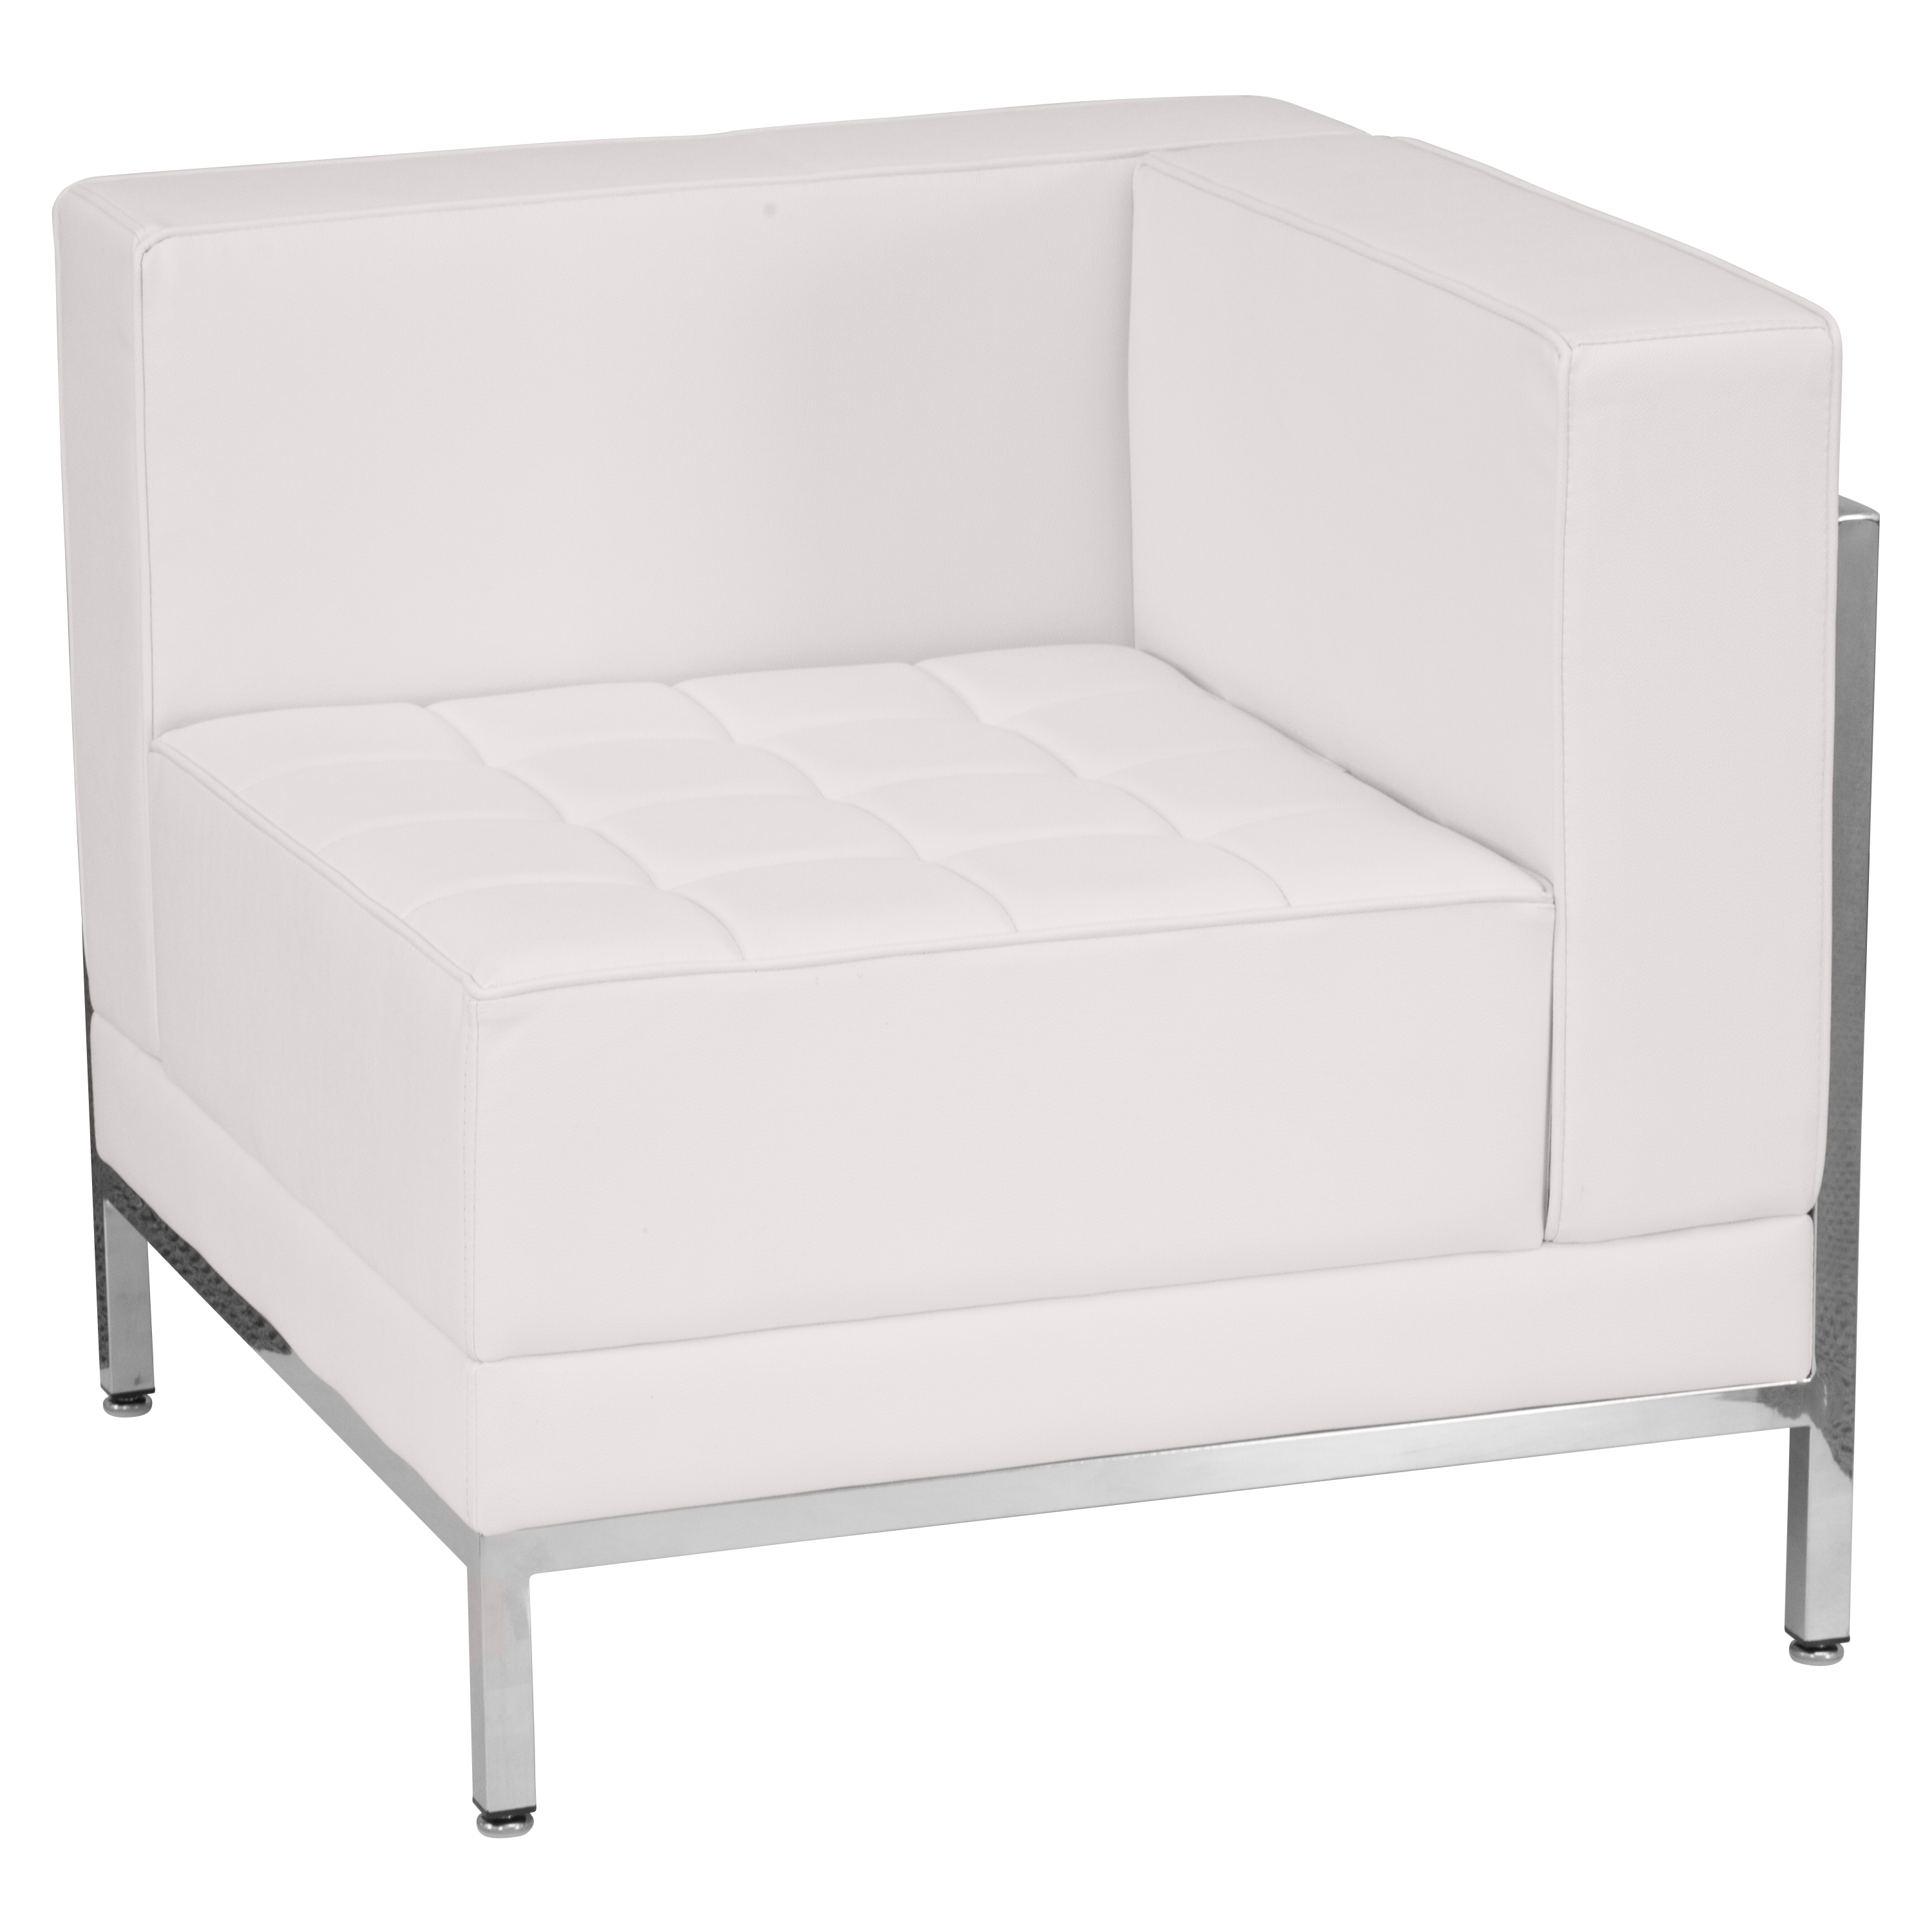 Flash Furniture ZB-IMAG-RIGHT-CORNER-WH-GG Hercules Imagination Series Contemporary White LeatherSoft Right Corner Chair